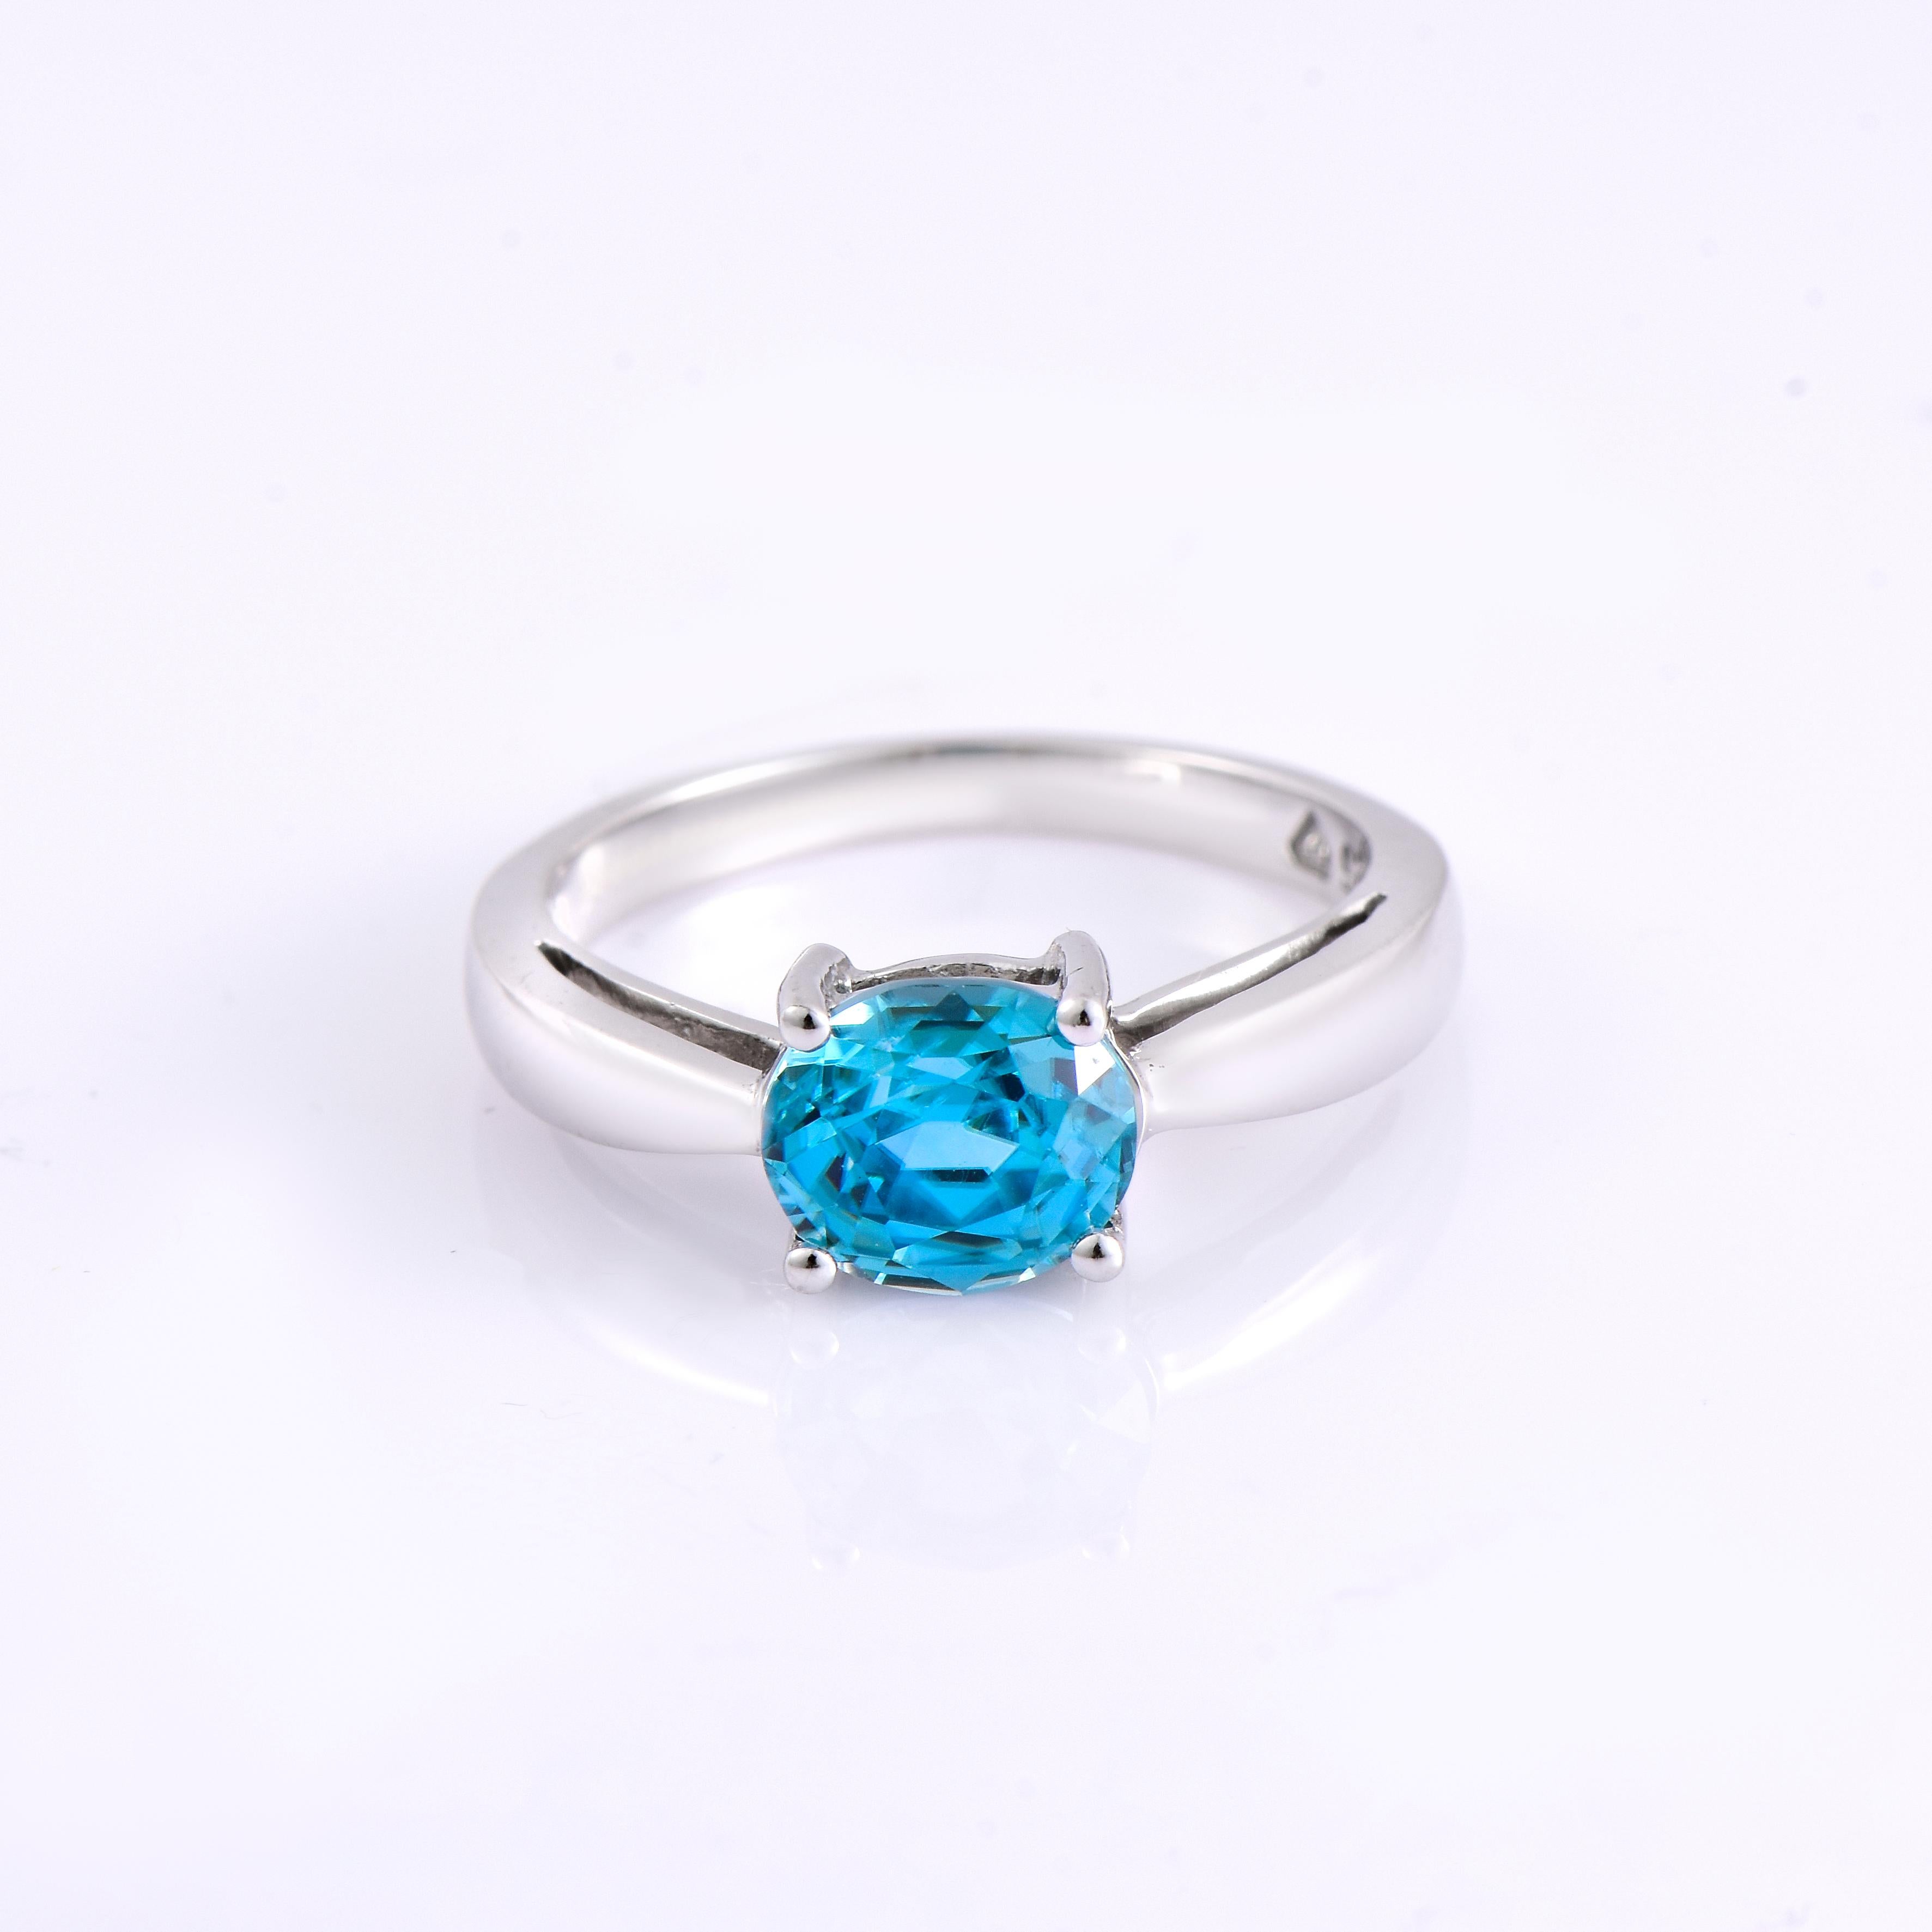 Contemporary Orloff of Denmark, 2 ct Natural Blue Zircon Ring in 925 Sterling Silver For Sale